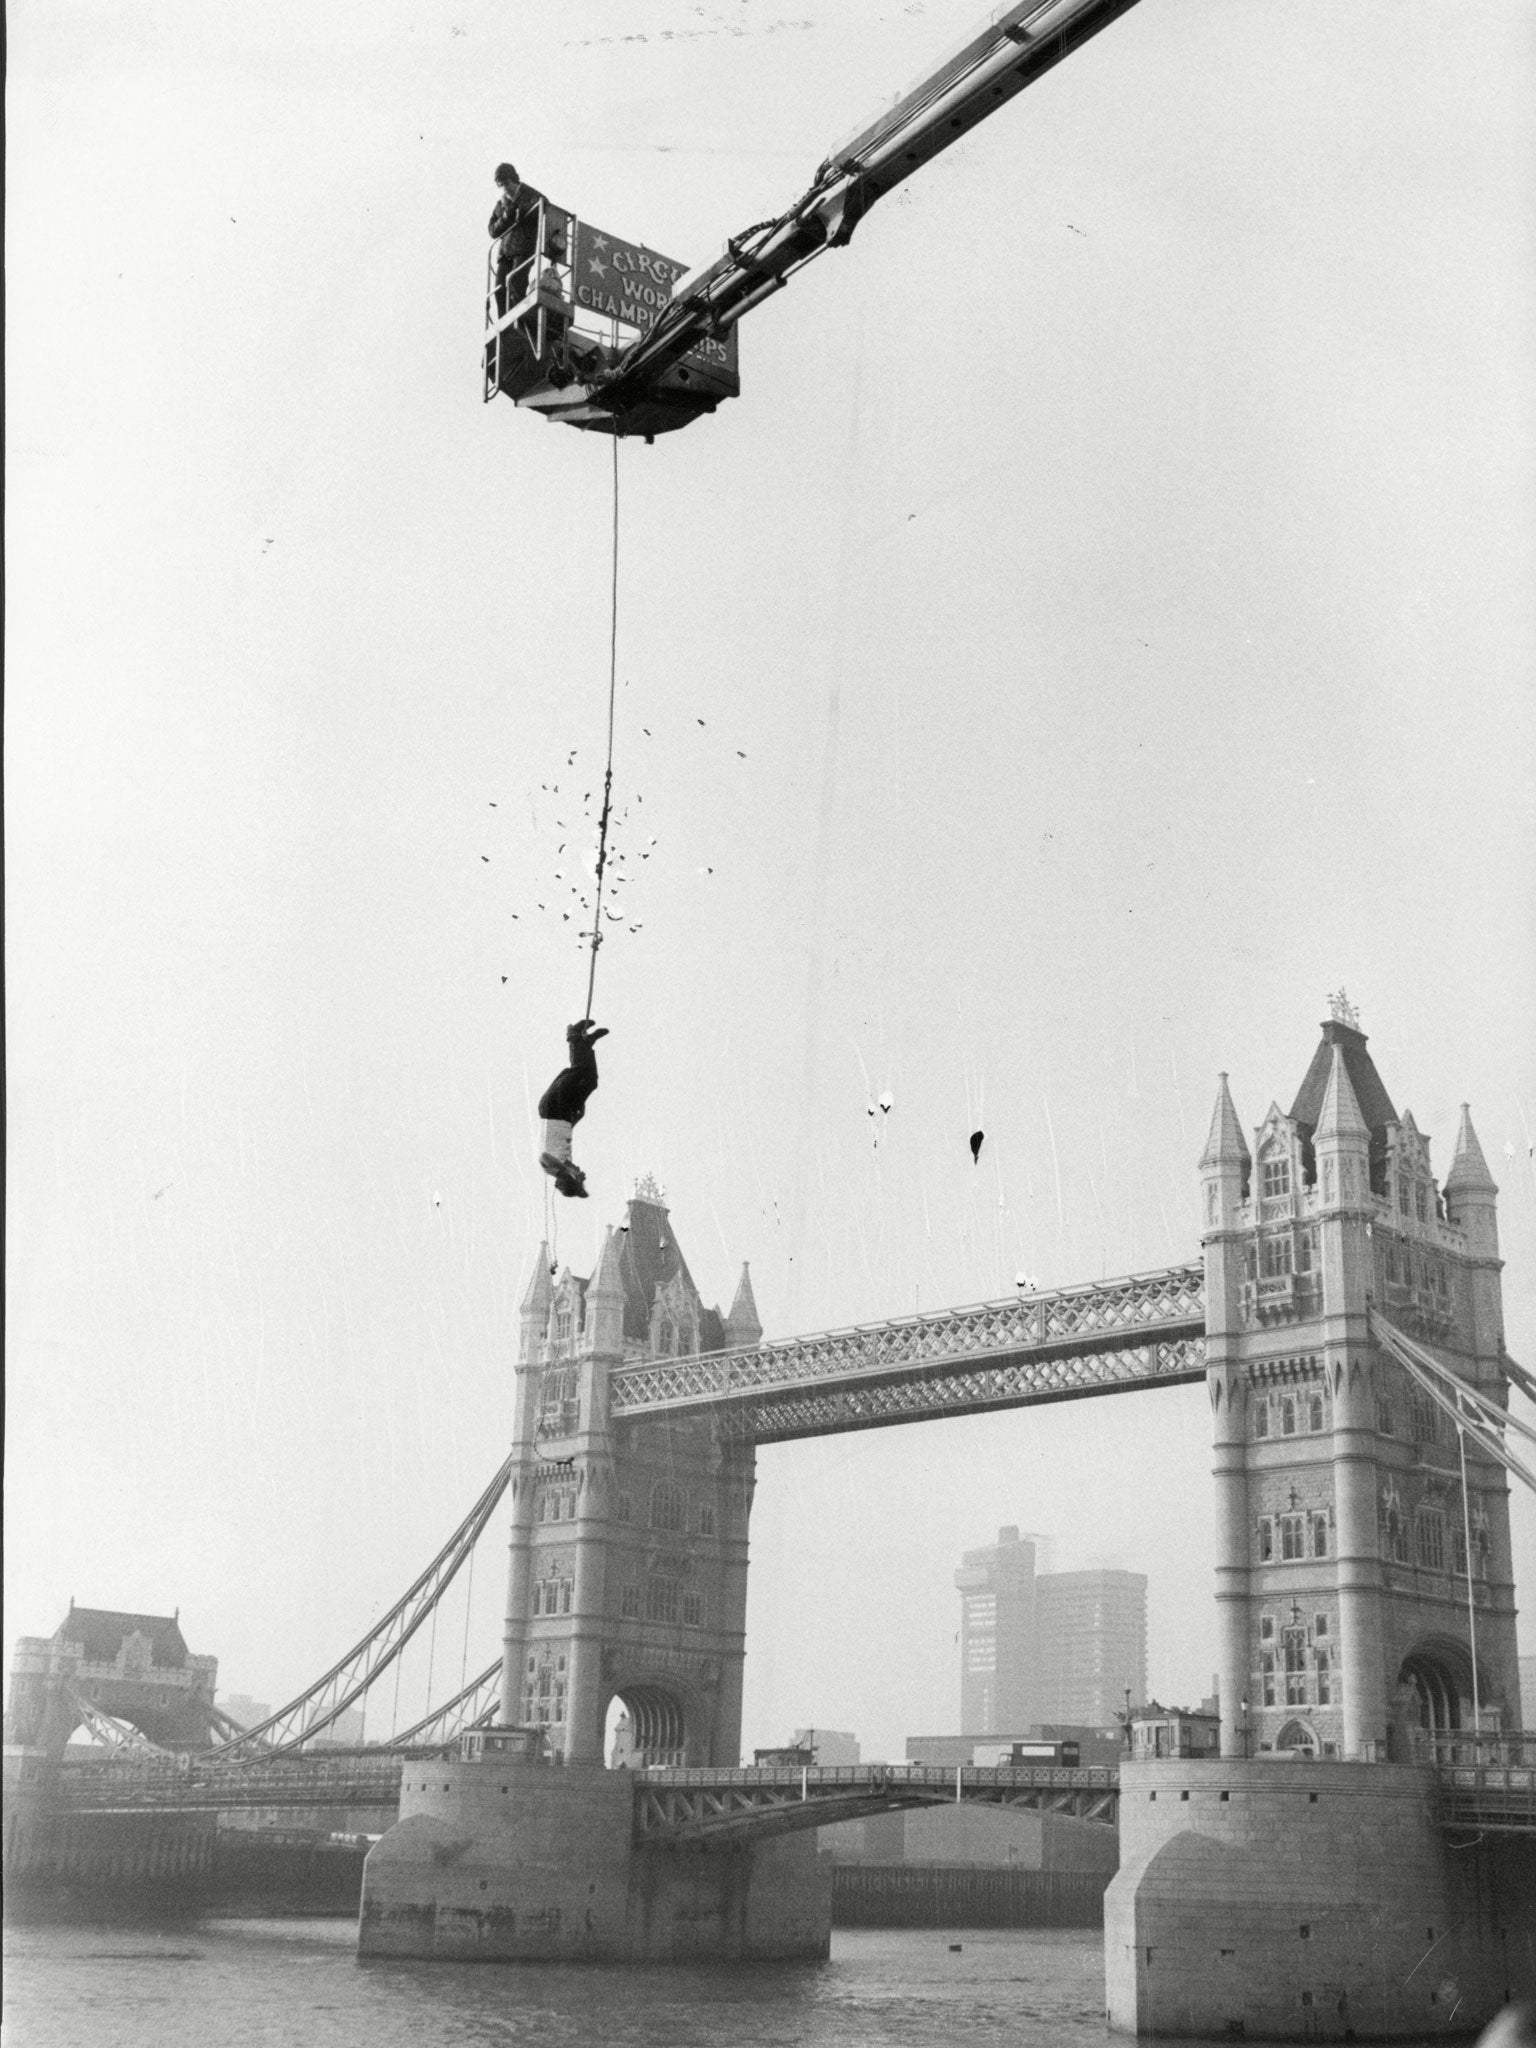 Alan Alan hangs over the Thames in a 1978 stunt